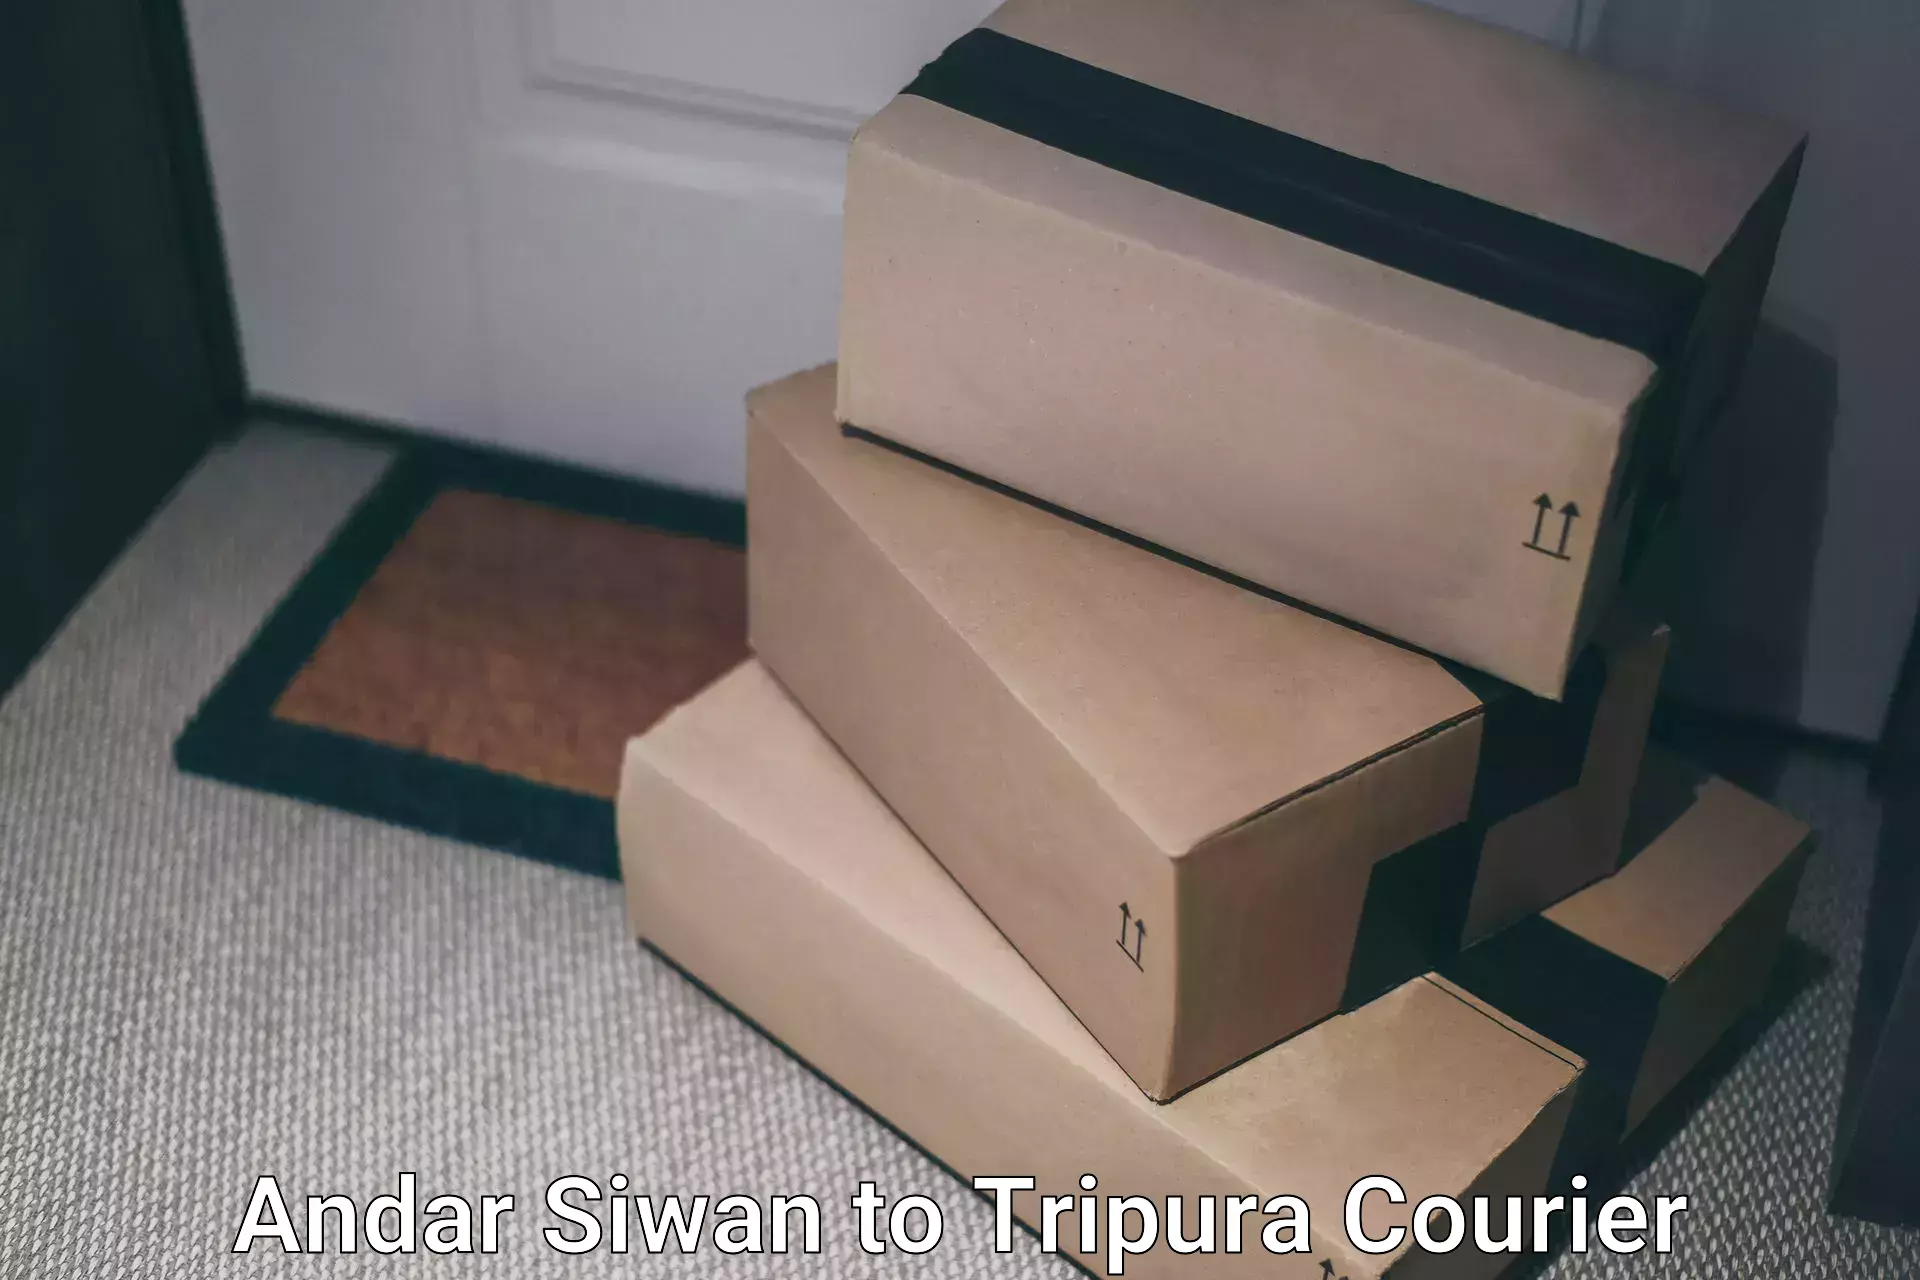 Expedited shipping methods Andar Siwan to Udaipur Tripura